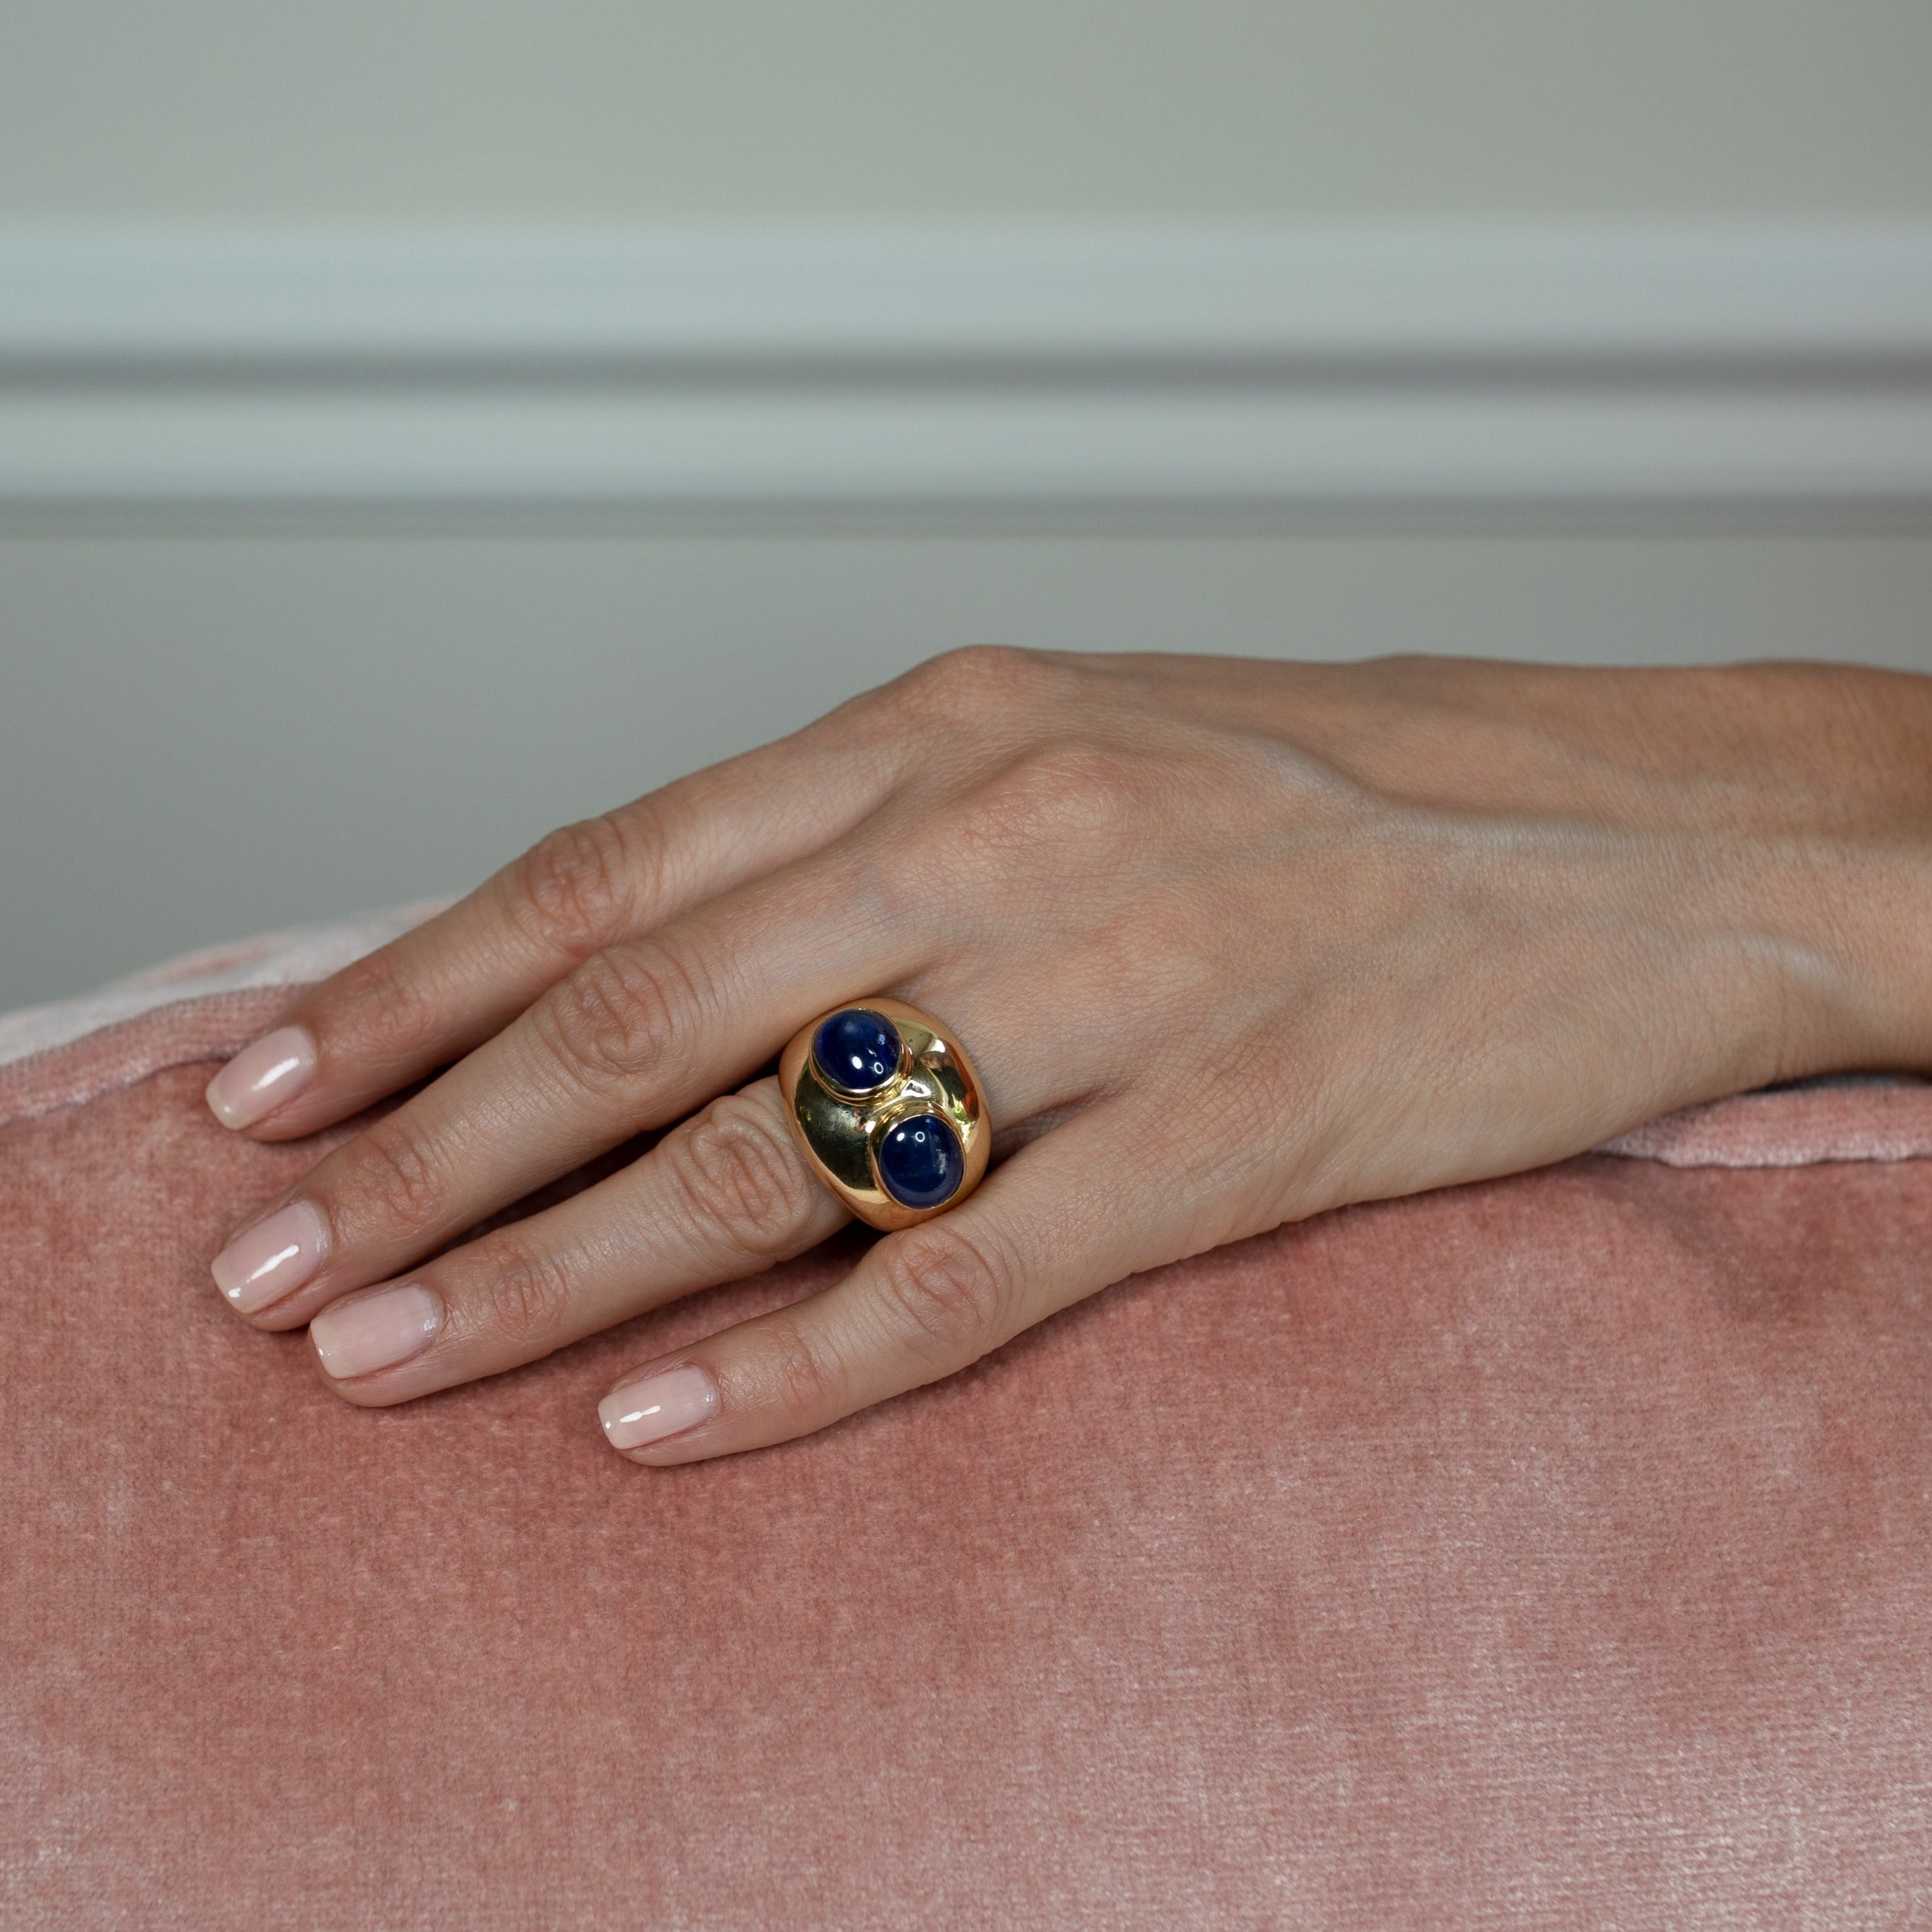 Blue sapphire ring in 18ct gold worn on women’s hand.